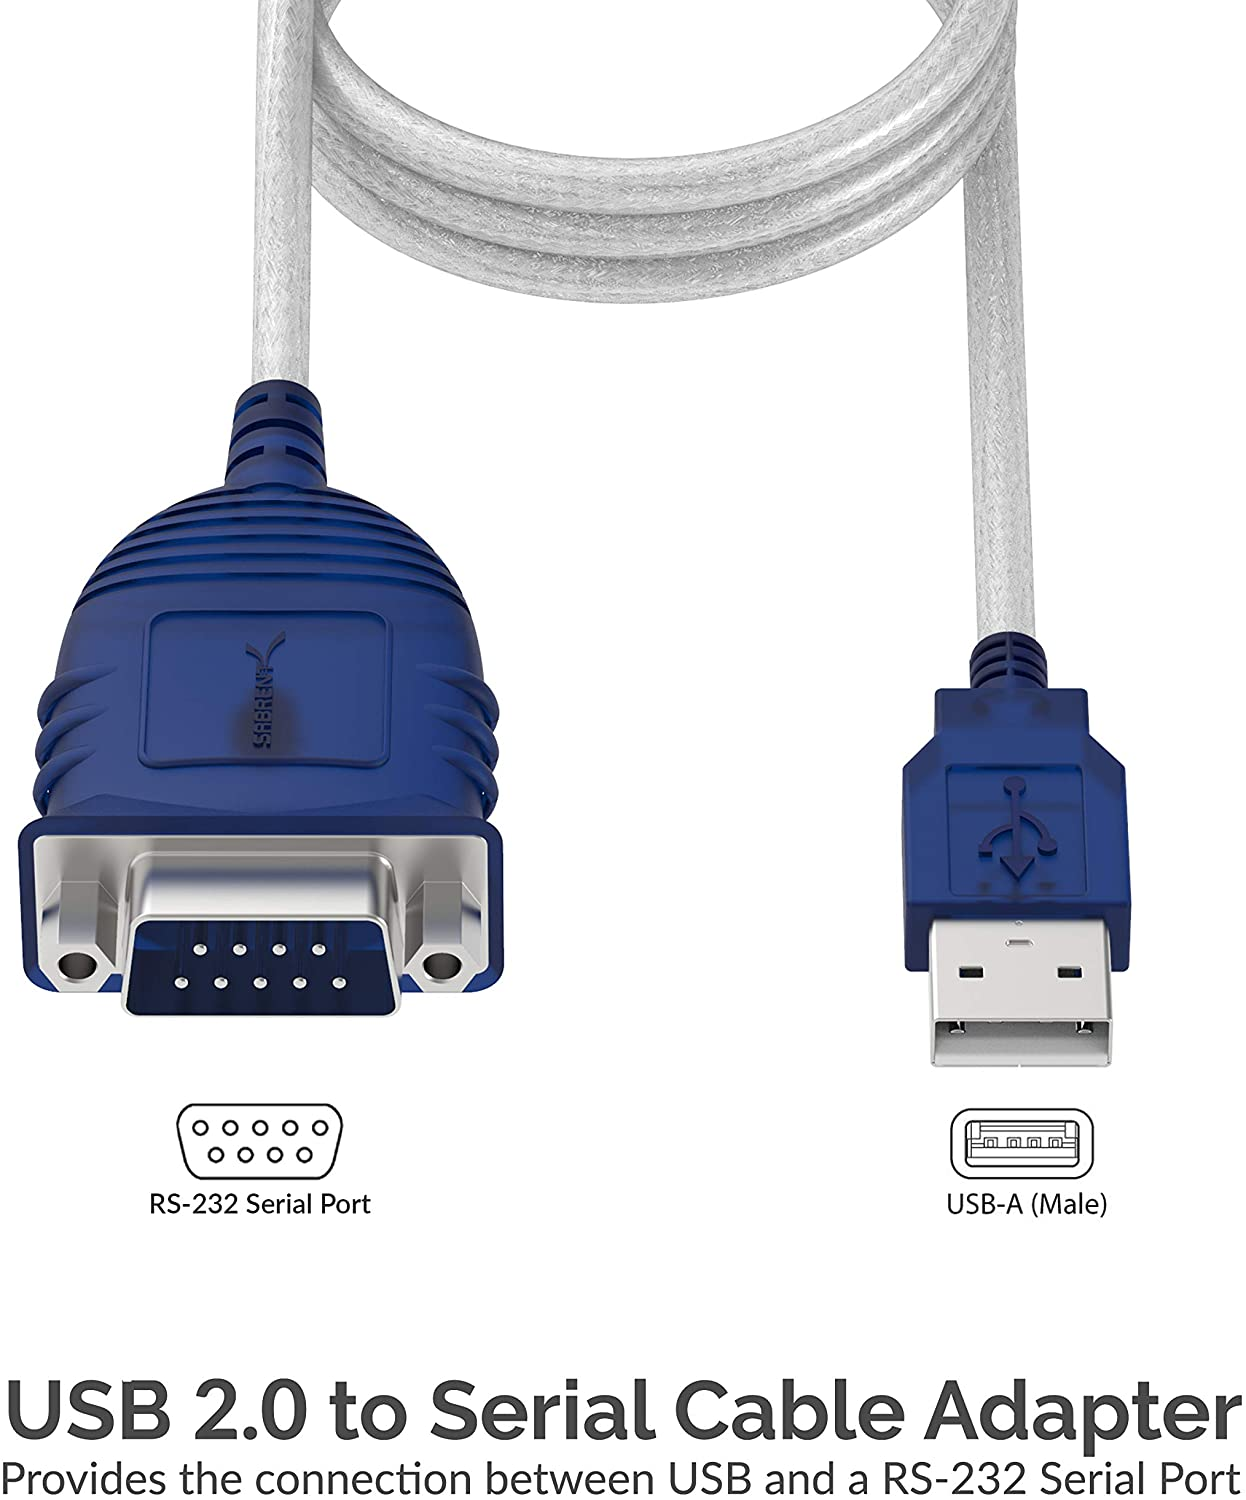 SABRENT USB 2.0 to Serial (9 Pin) DB 9 RS 232 Converter Cable, Prolific Chipset, HEXNUTS, [Windows 11/10/8.1/8/7/VISTA/XP, Mac OS X 10.6 and Above] 2.5 Feet (CB-DB9P)